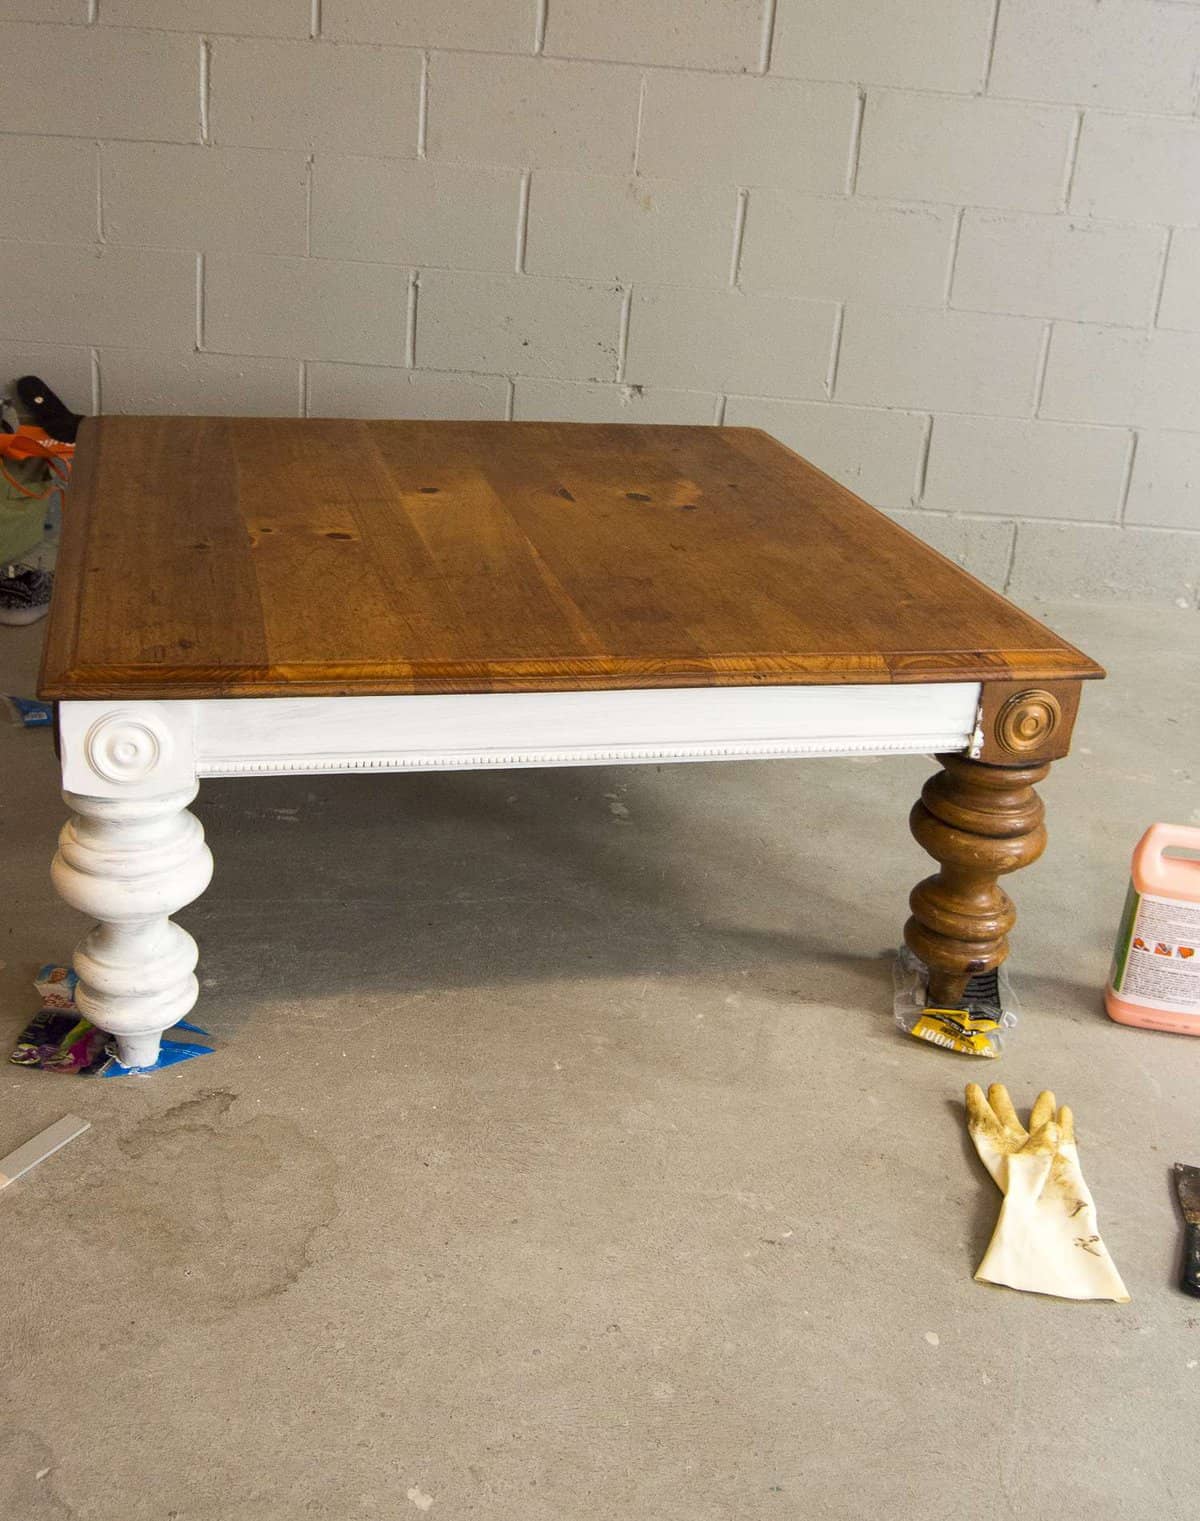 If you're looking for an easy and inexpensive way to transform a thrifted coffee table then this is the post for you! I've taken a thrifted coffee table and made it the modern farmhouse table of my dreams with this DIY coffee table transformation.